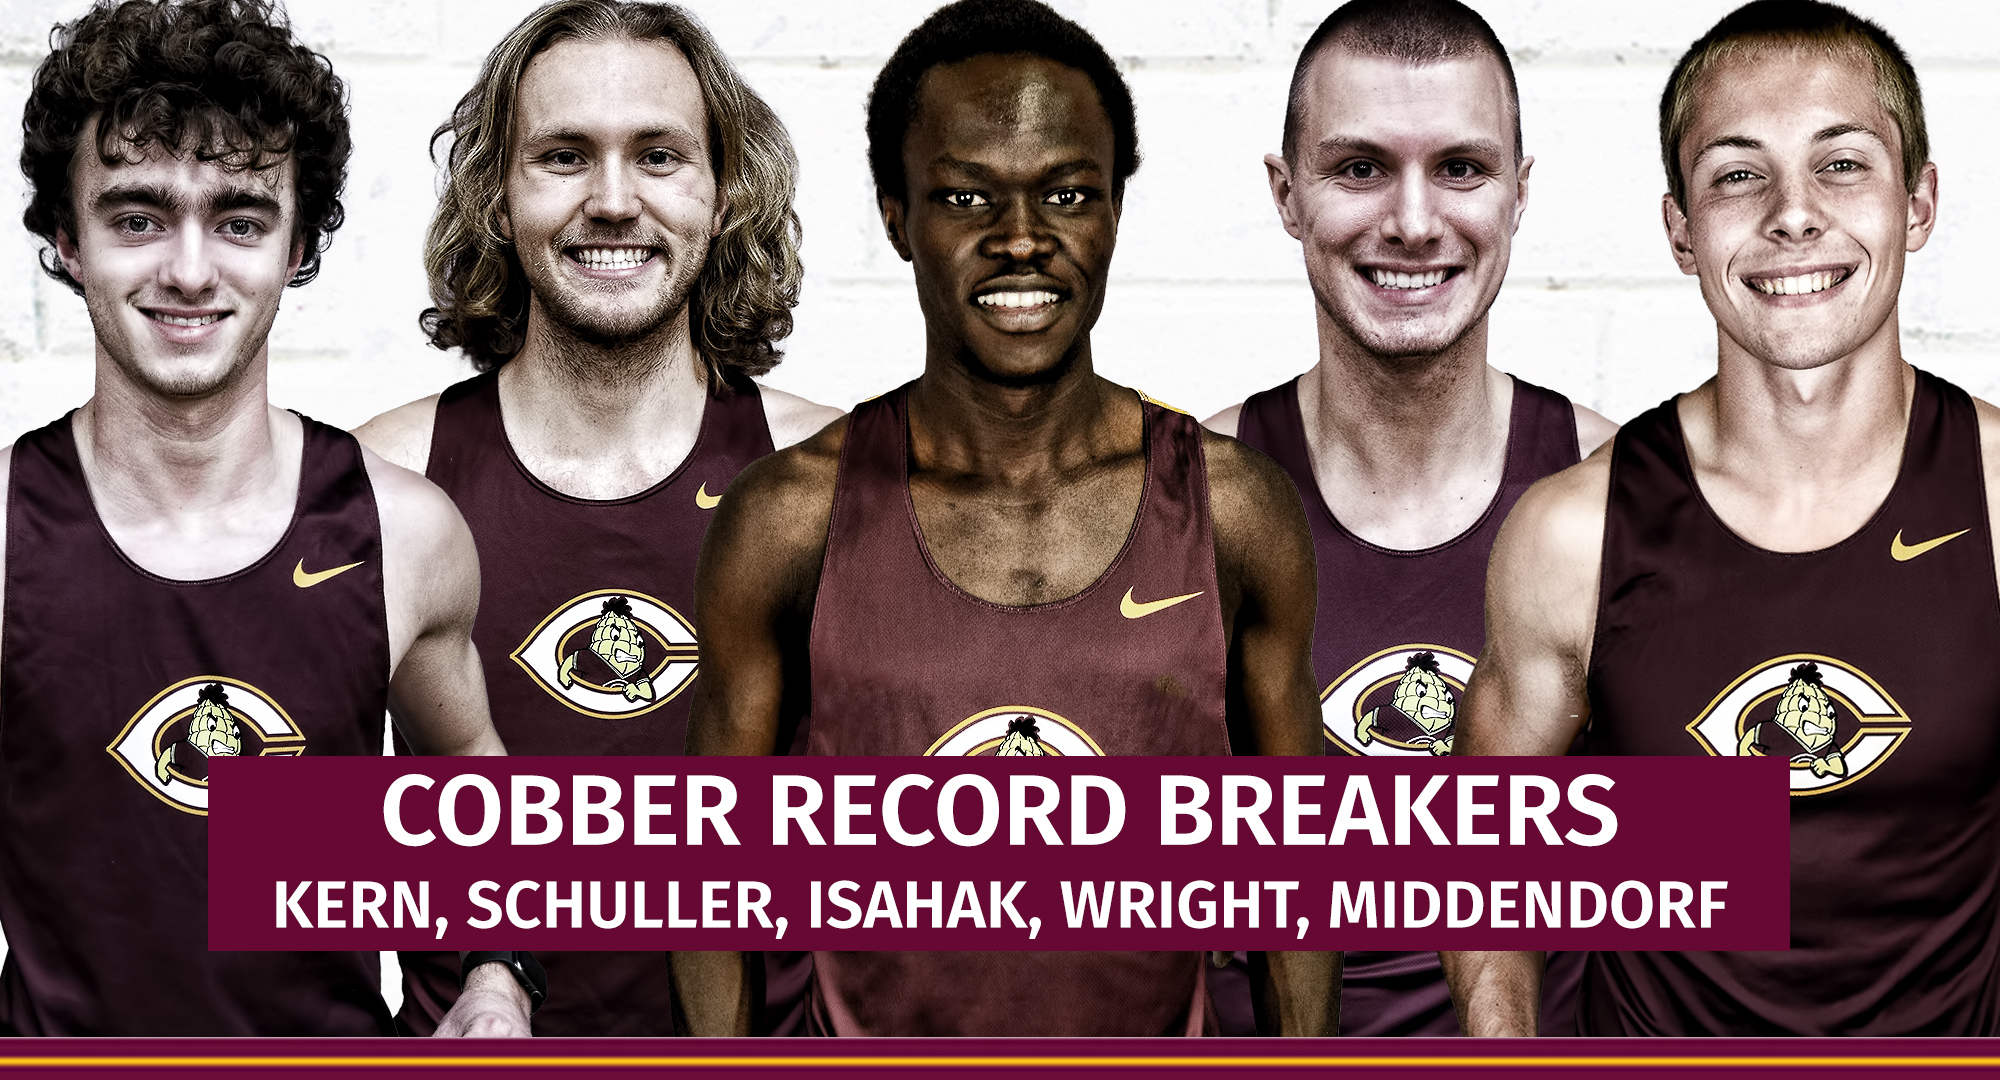 Tommy Kern, Colin Schuller, Munir Isahak, Cal Wright and Jesse Middendorf all broke school records at the NDSU Bison Open.